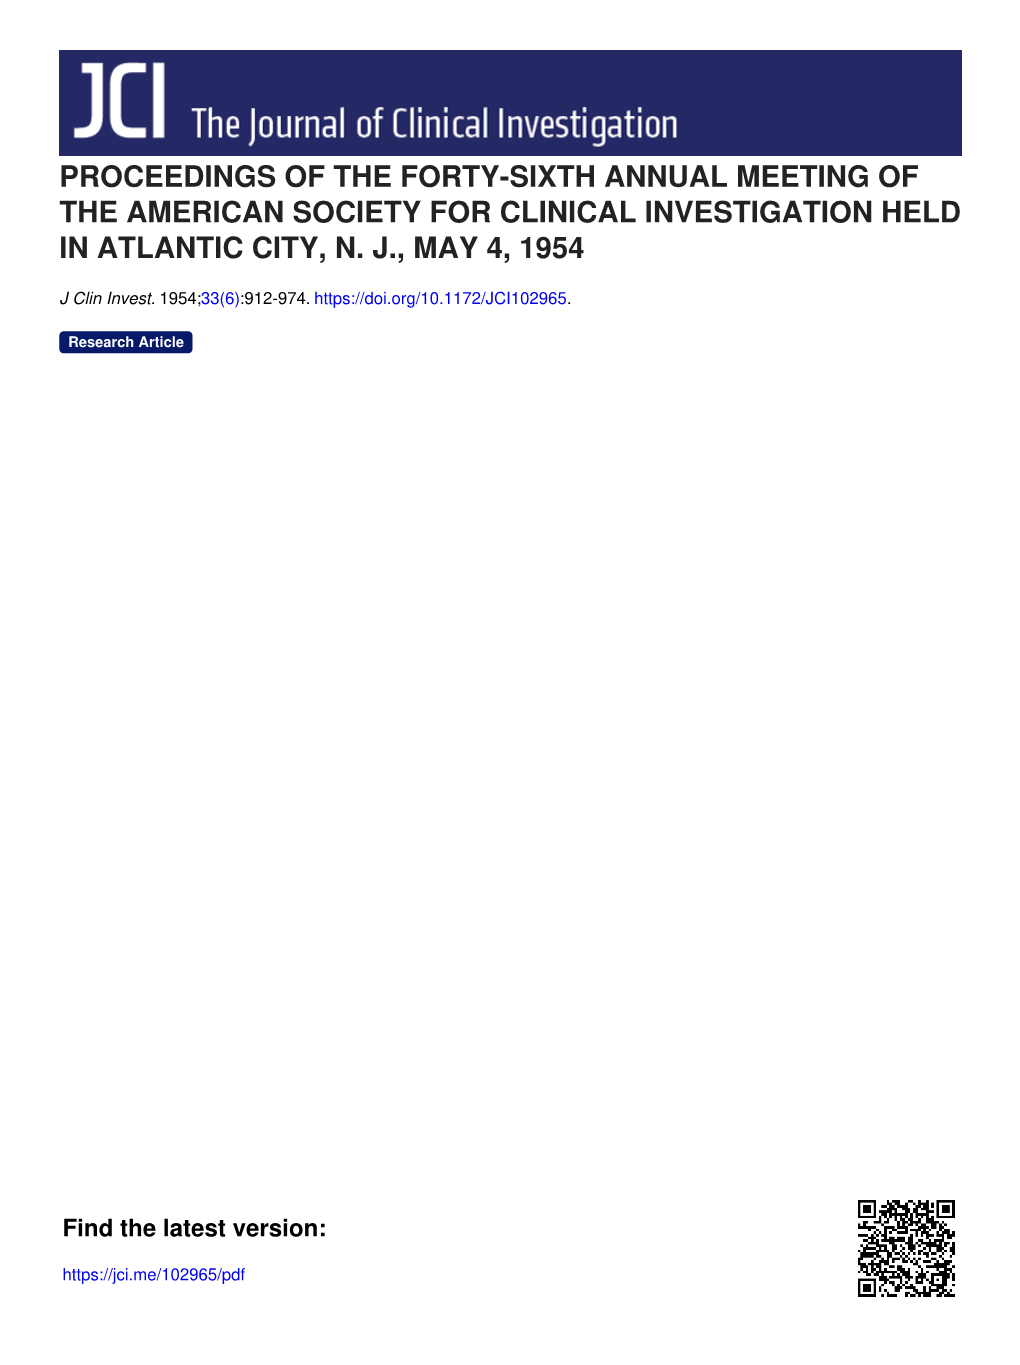 Proceedings of the Forty-Sixth Annual Meeting of the American Society for Clinical Investigation Held in Atlantic City, N